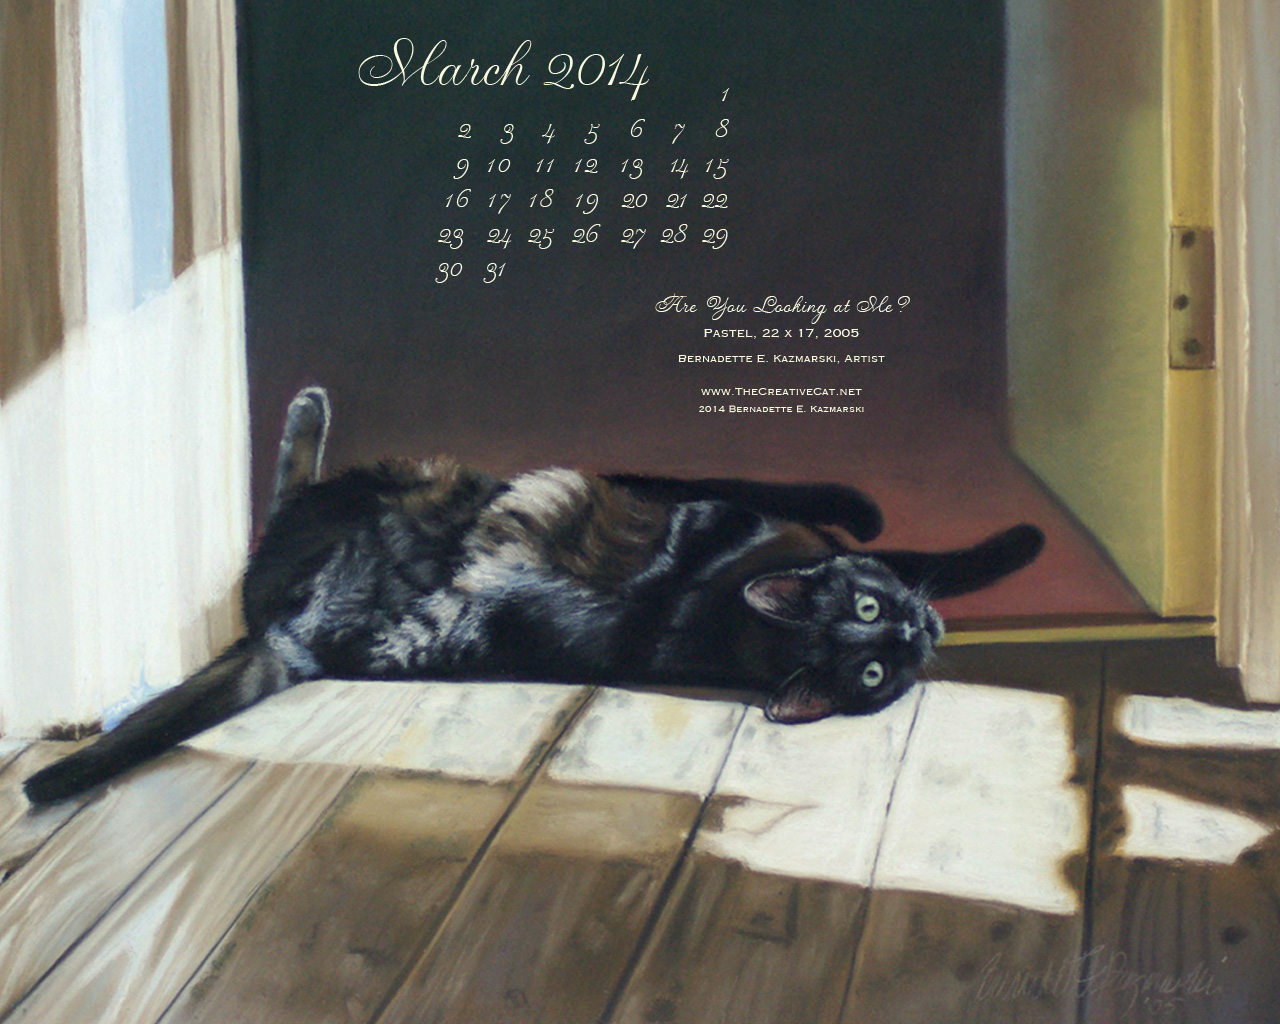 "Are You Looking At Me" Desktop Calendar for March 2014.